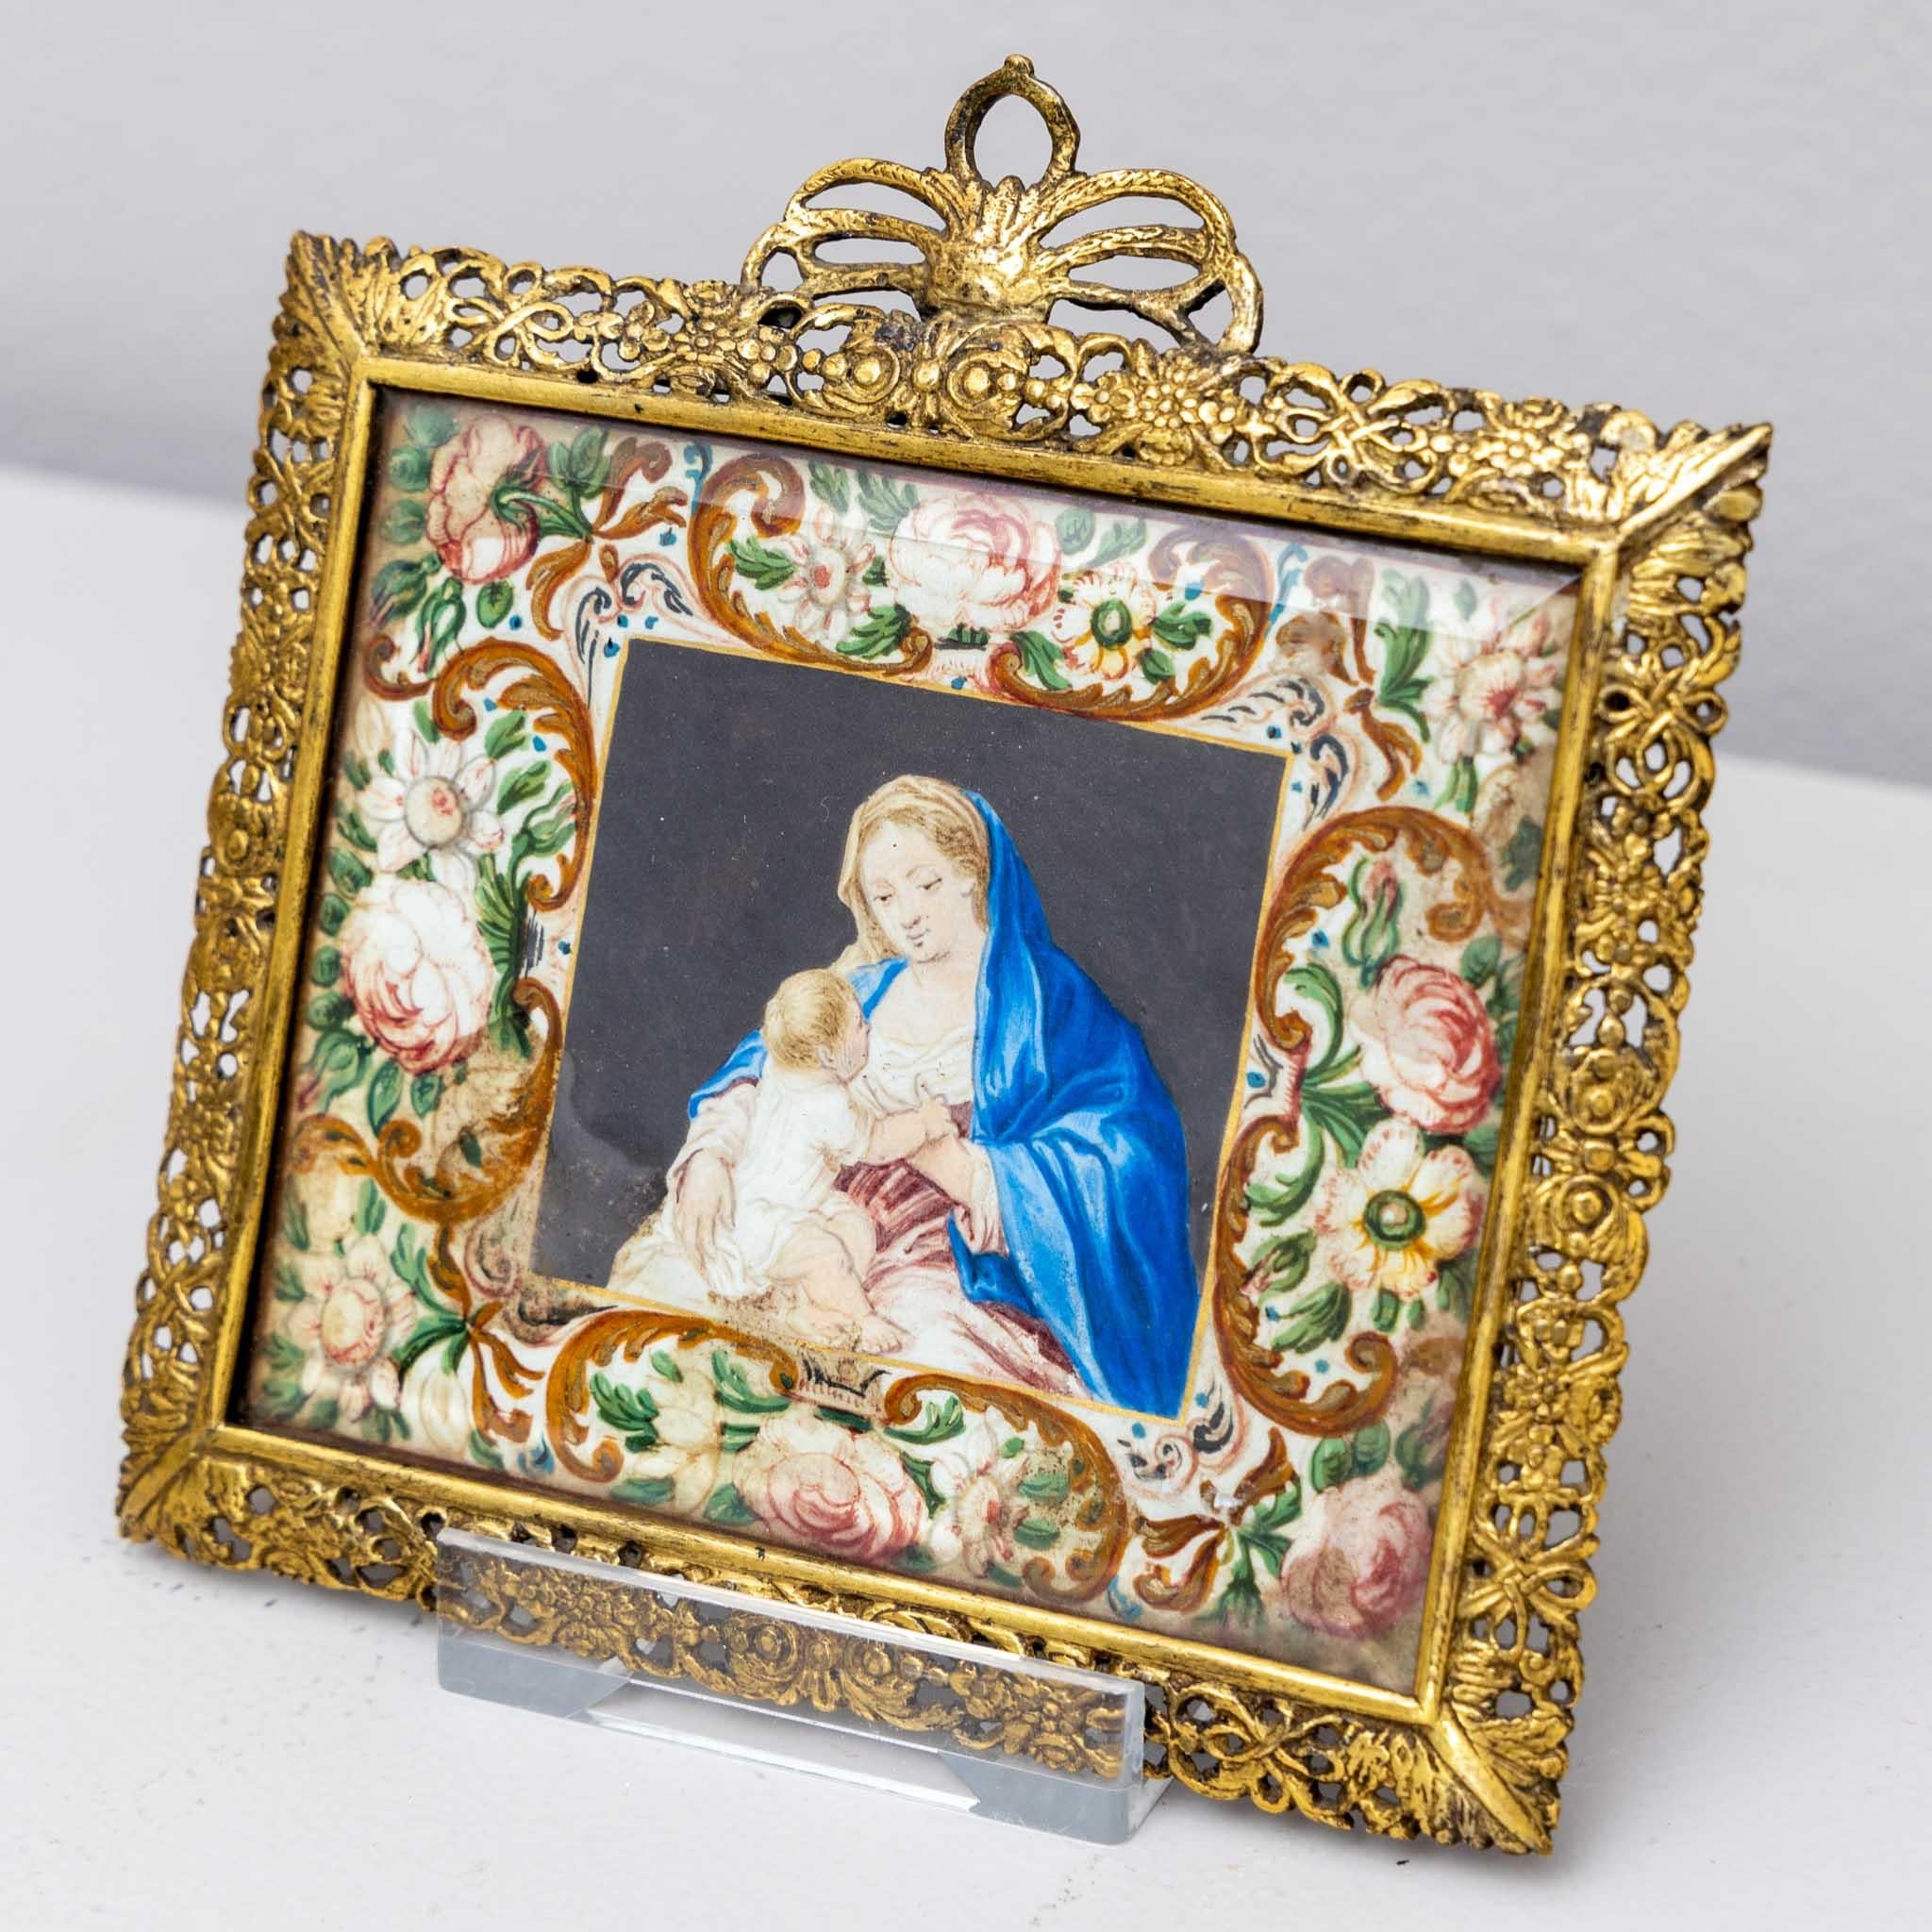 Pair of gouaches with depictions of the Virgin Mary in fine brass frames. Dated on the reverse. Provenance: Comte et Comtesse de Viel Castel, Sotheby's Paris, 12 September 2018, lot 1.